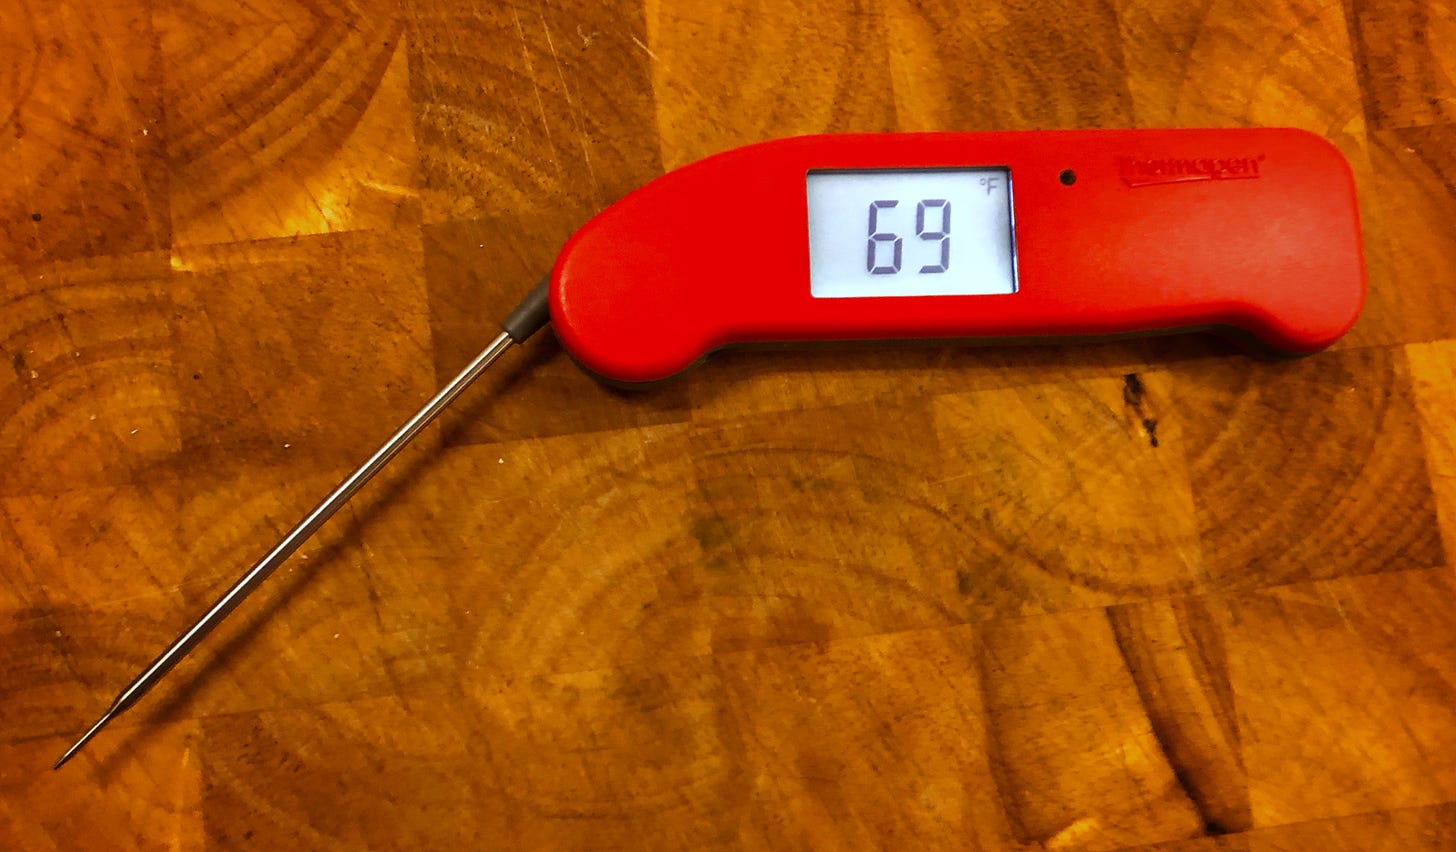 Open digital thermometer on a cutting board. The display reads 69 degrees Fahrenheit.